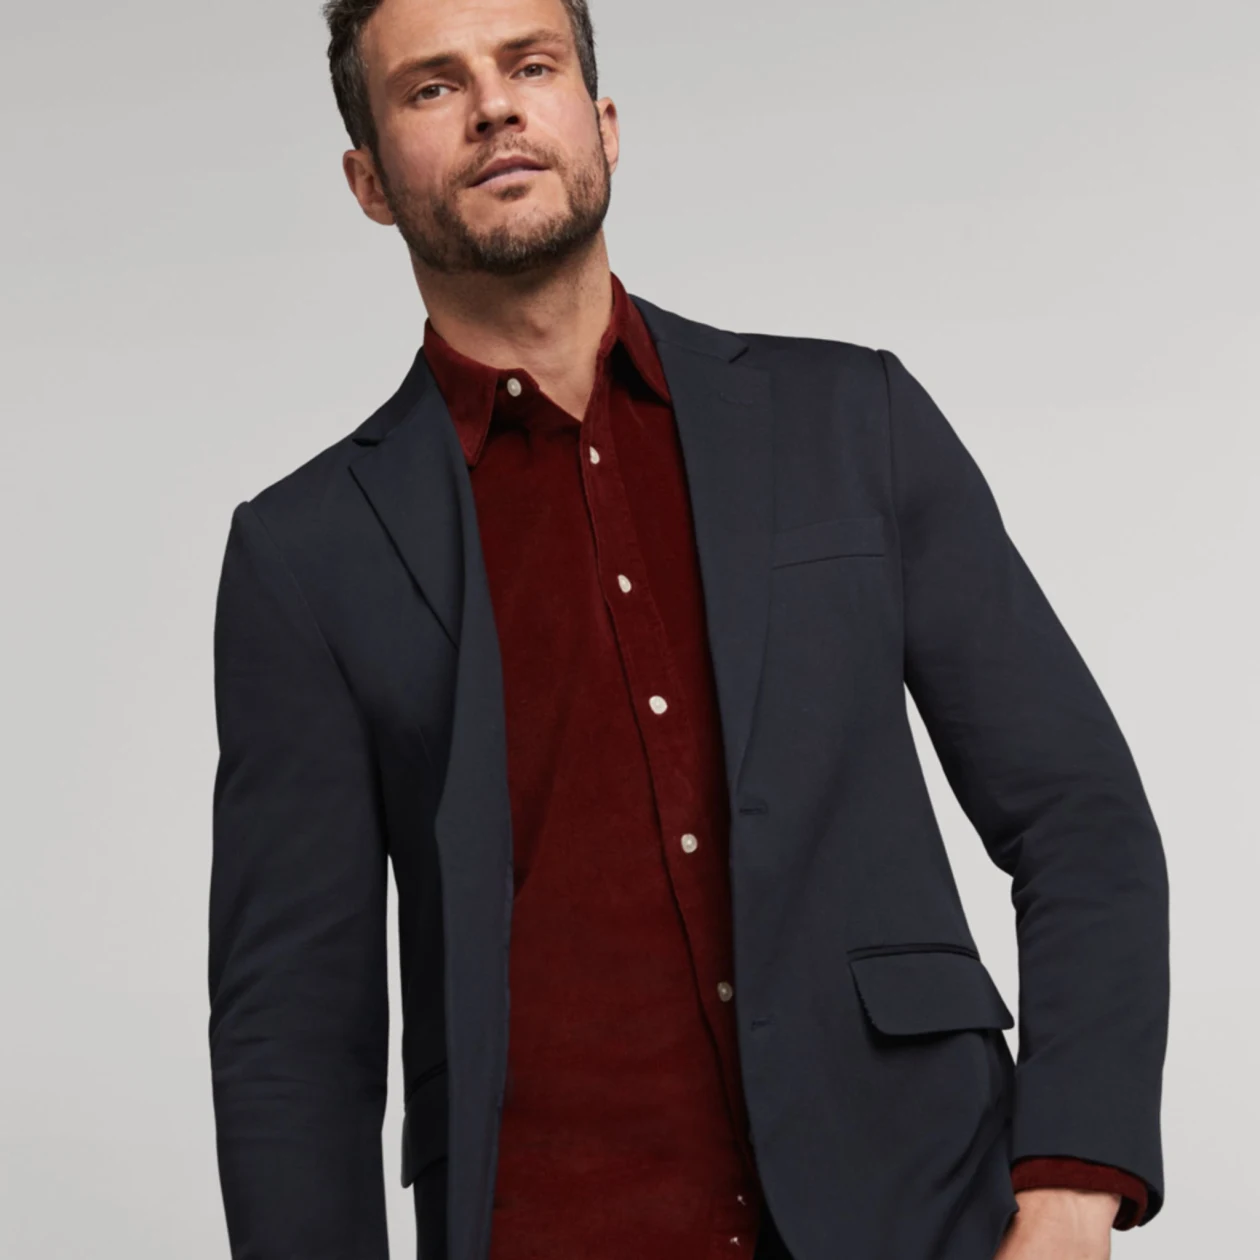 Man in red button-down shirt and black blazer from Stitch Fix 